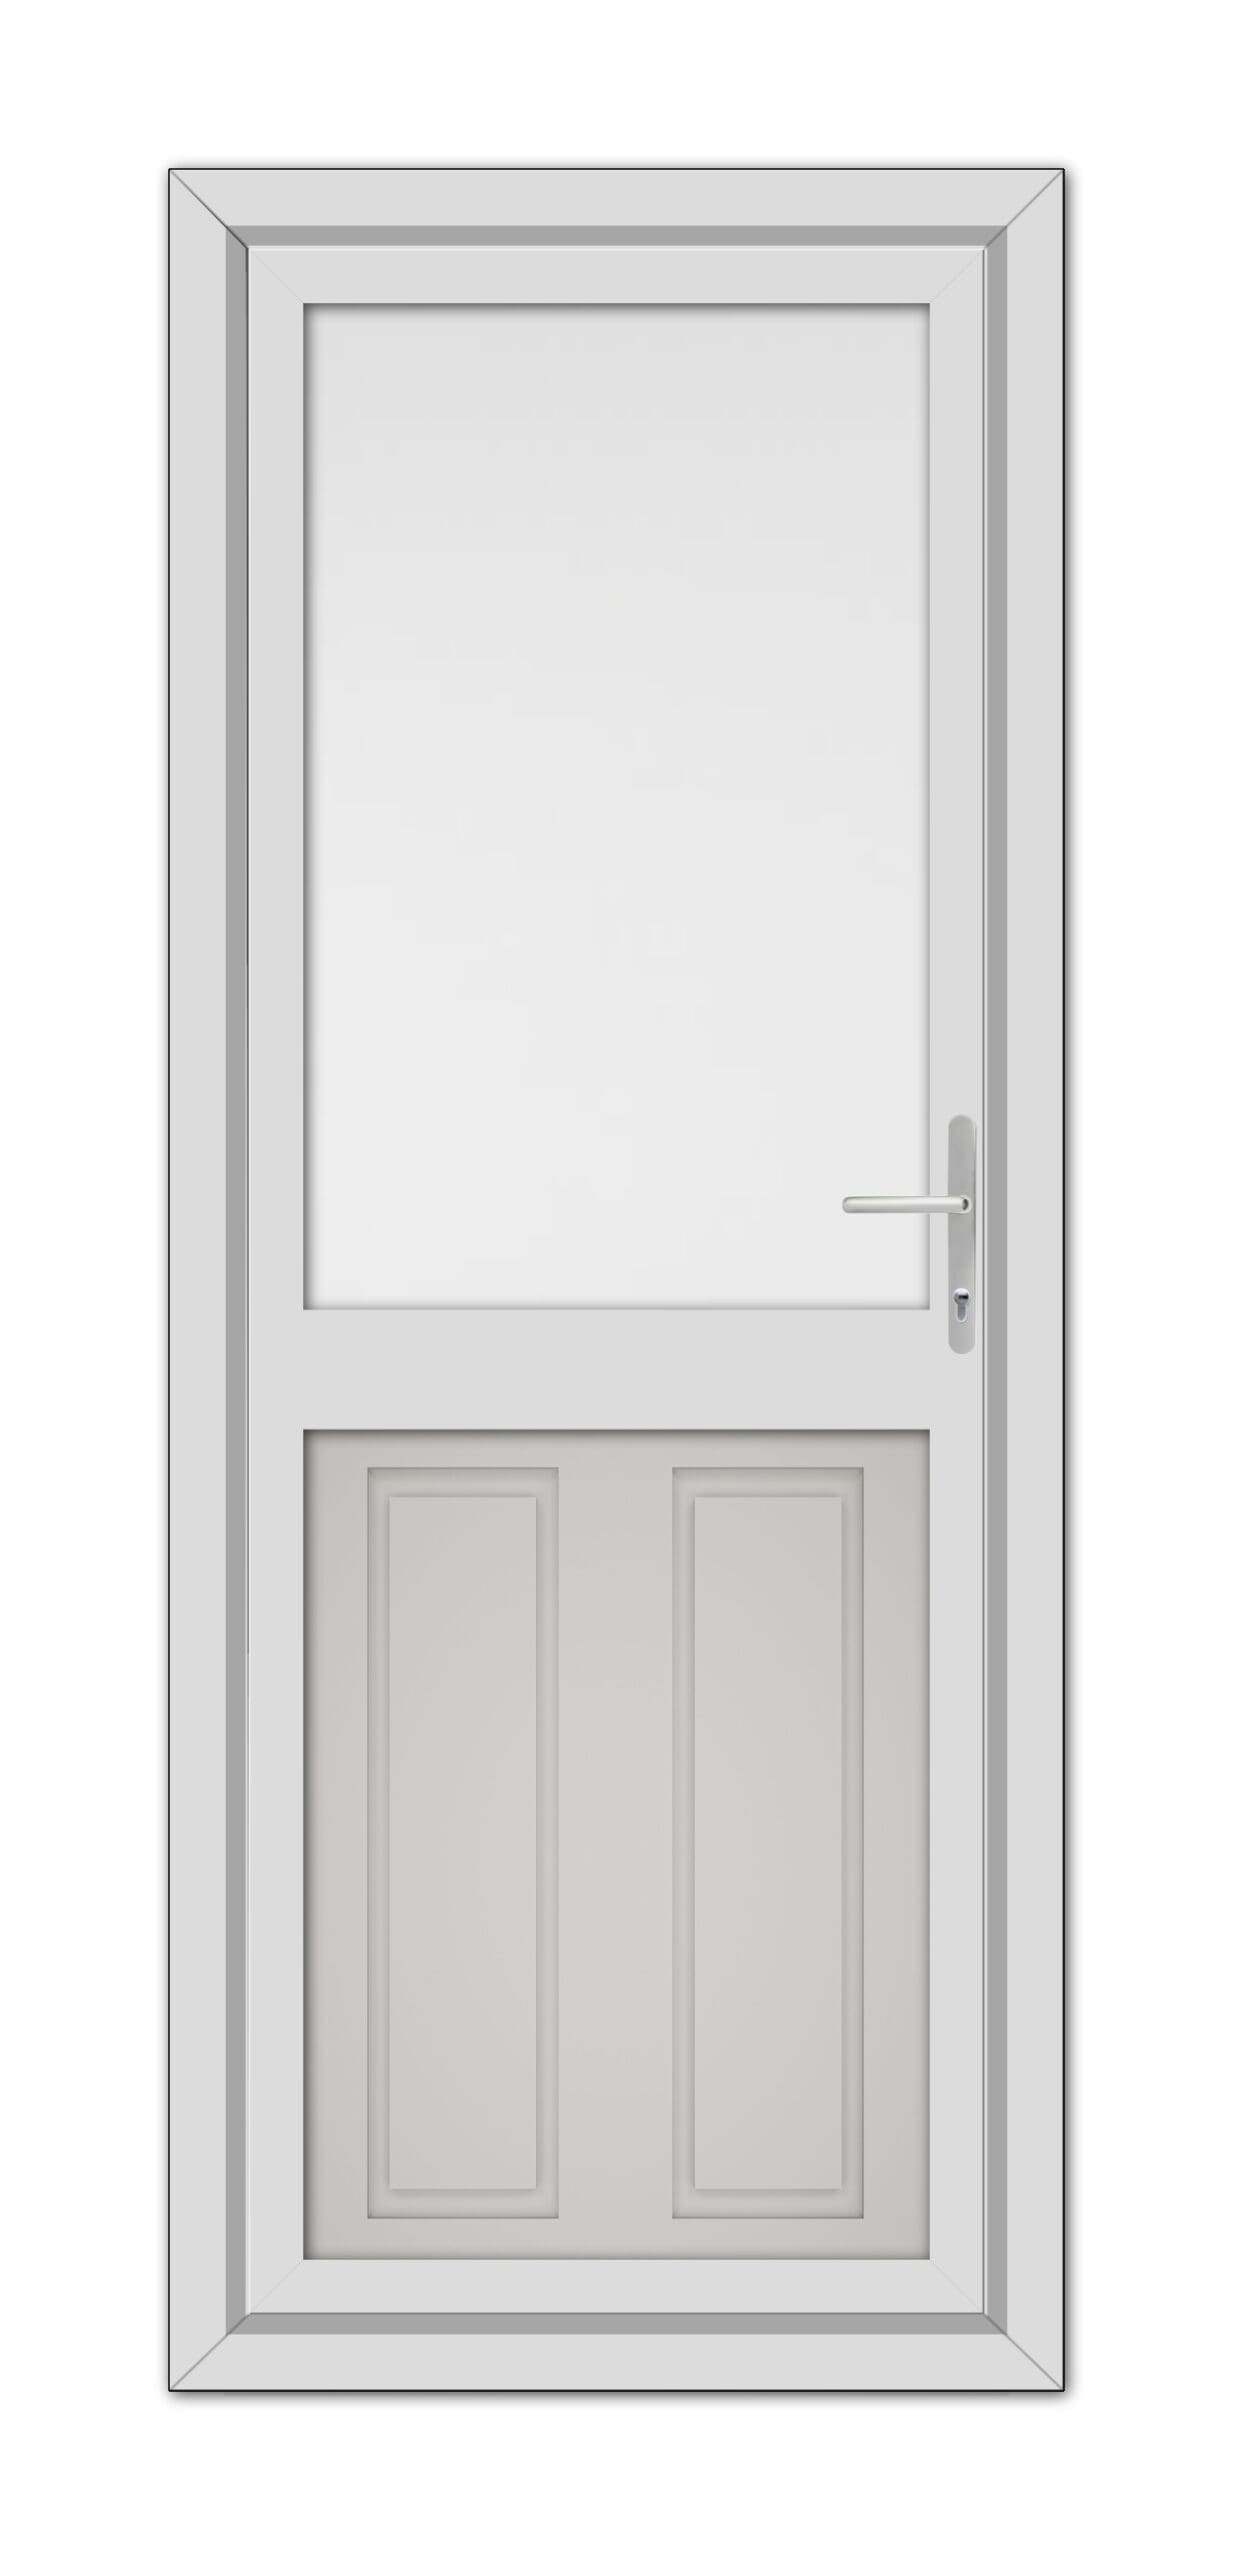 A Silver Grey Manor Half uPVC Back Door with a window at the top, two recessed panels at the bottom, and a metallic handle on the right side.